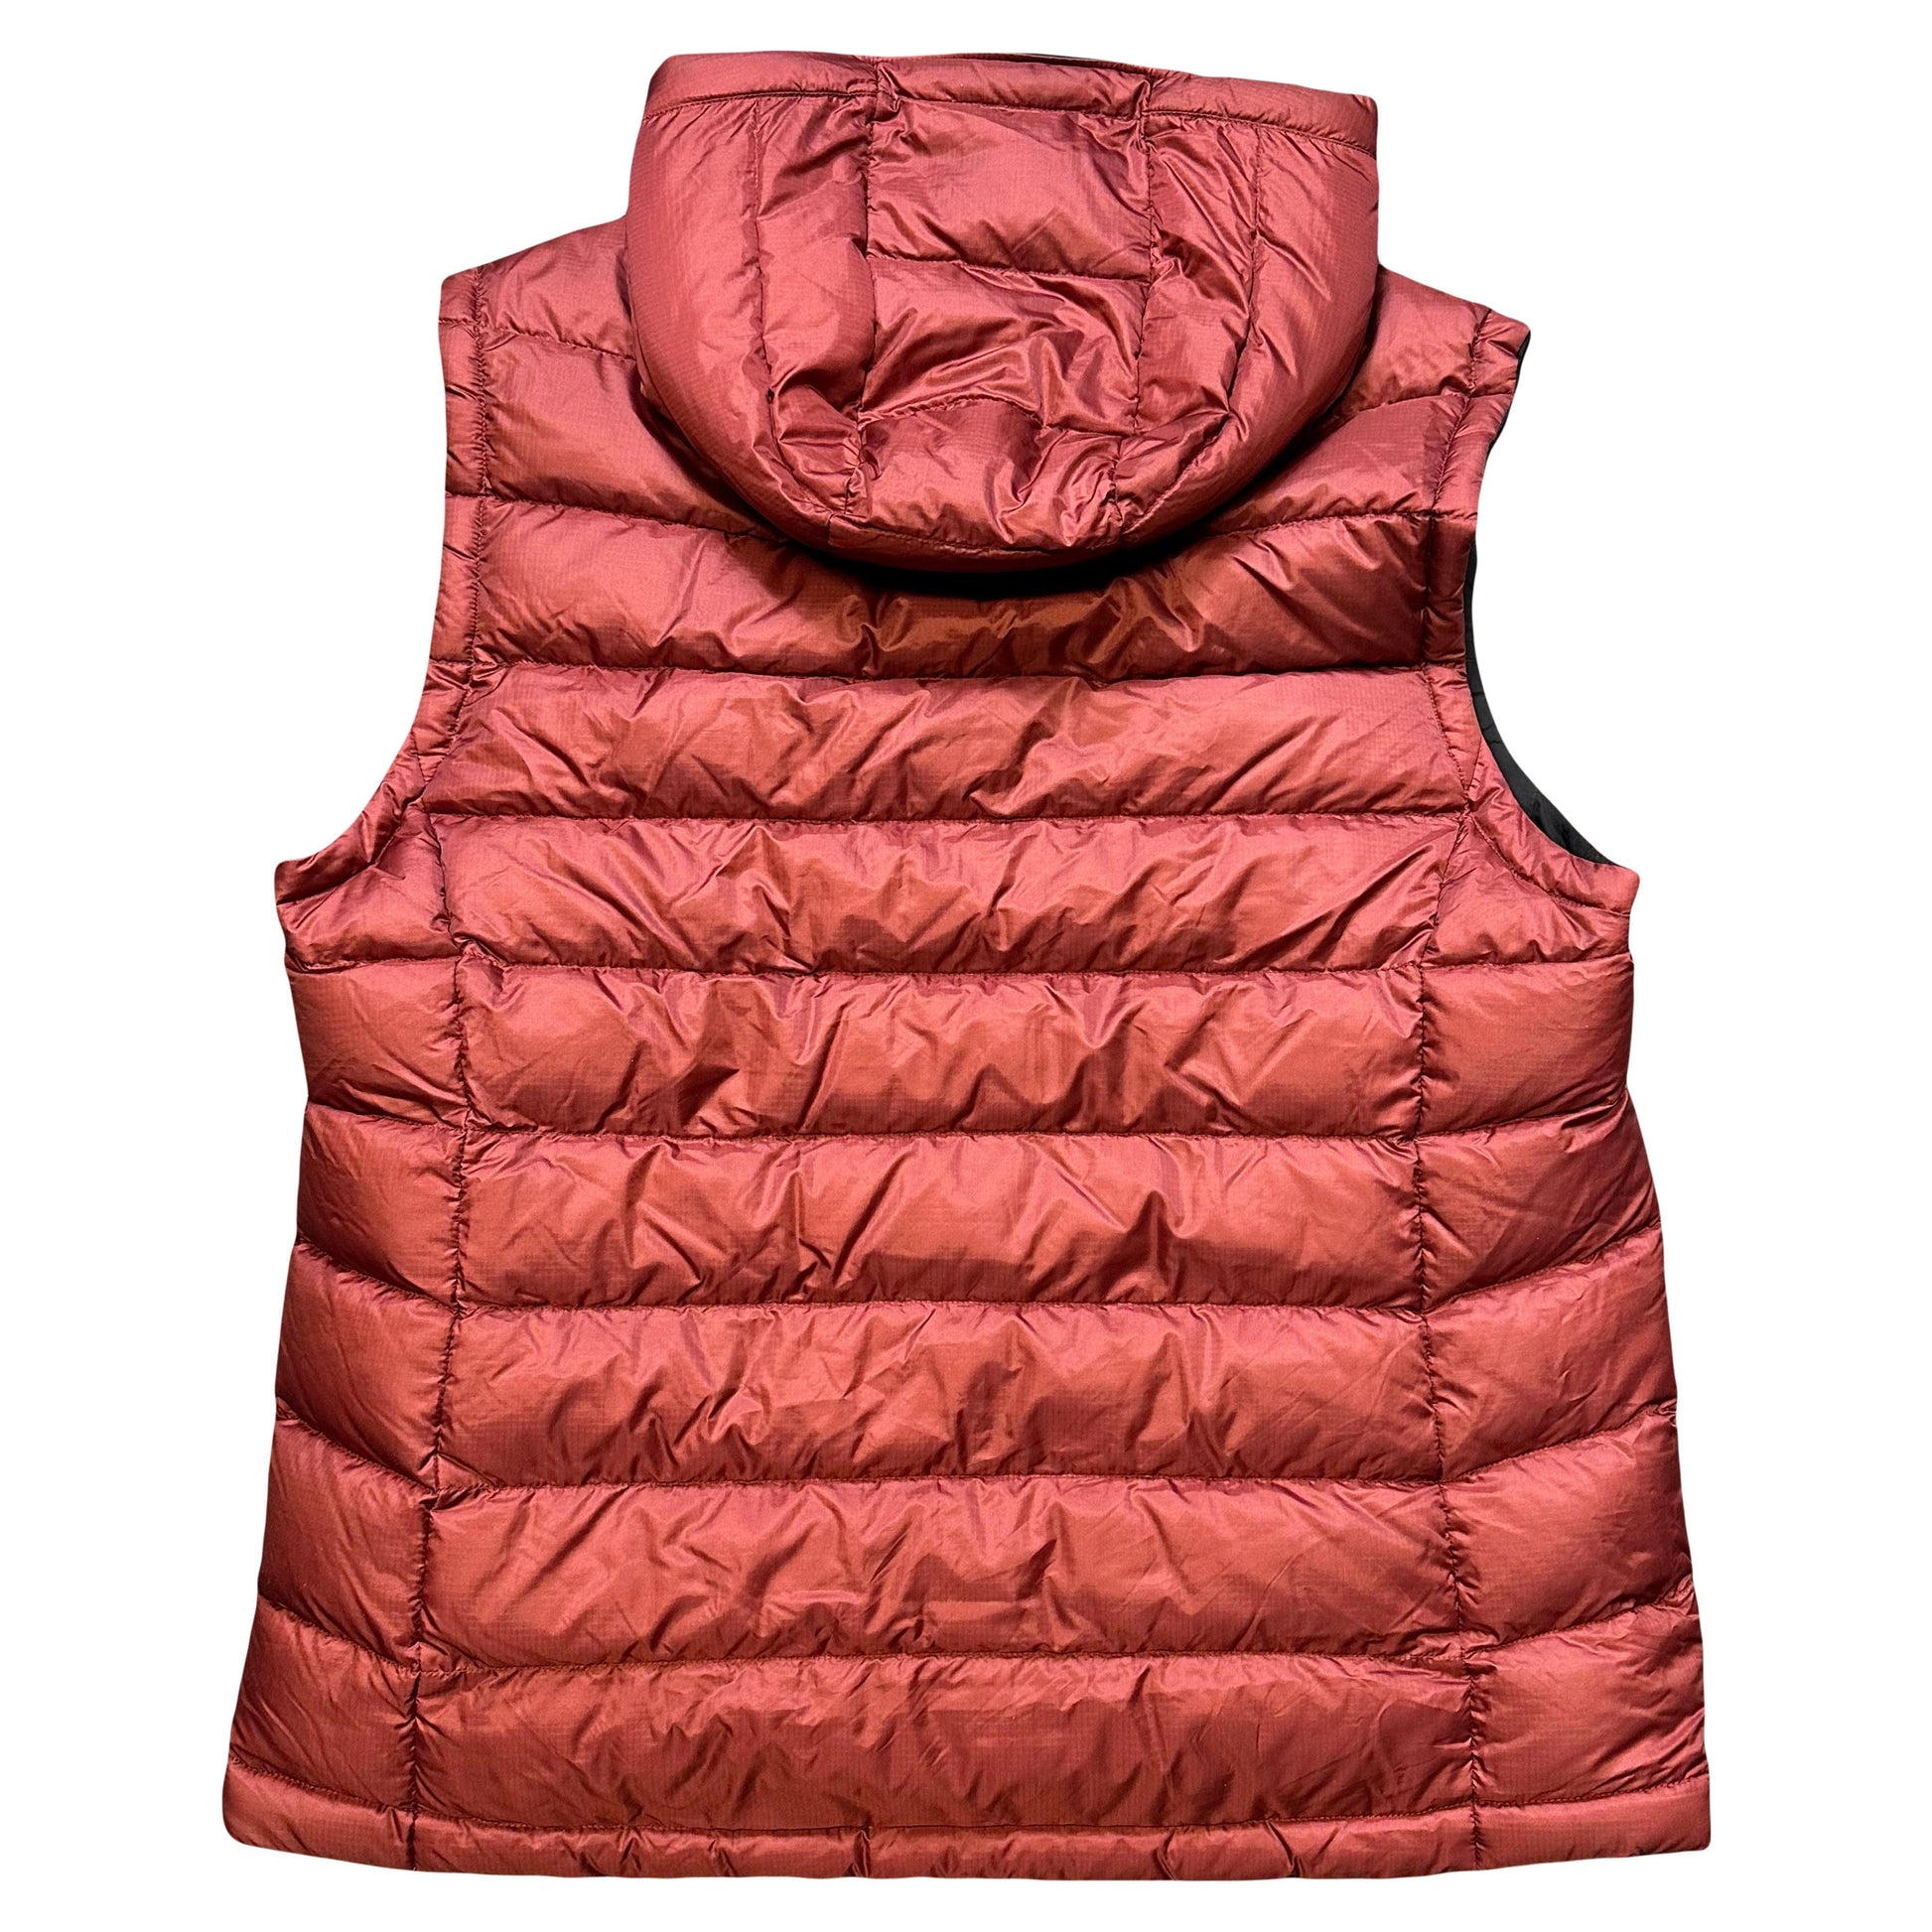 Montbell Reversible Down Puffer Gilet In Red & Black ( XL ) - Known Source